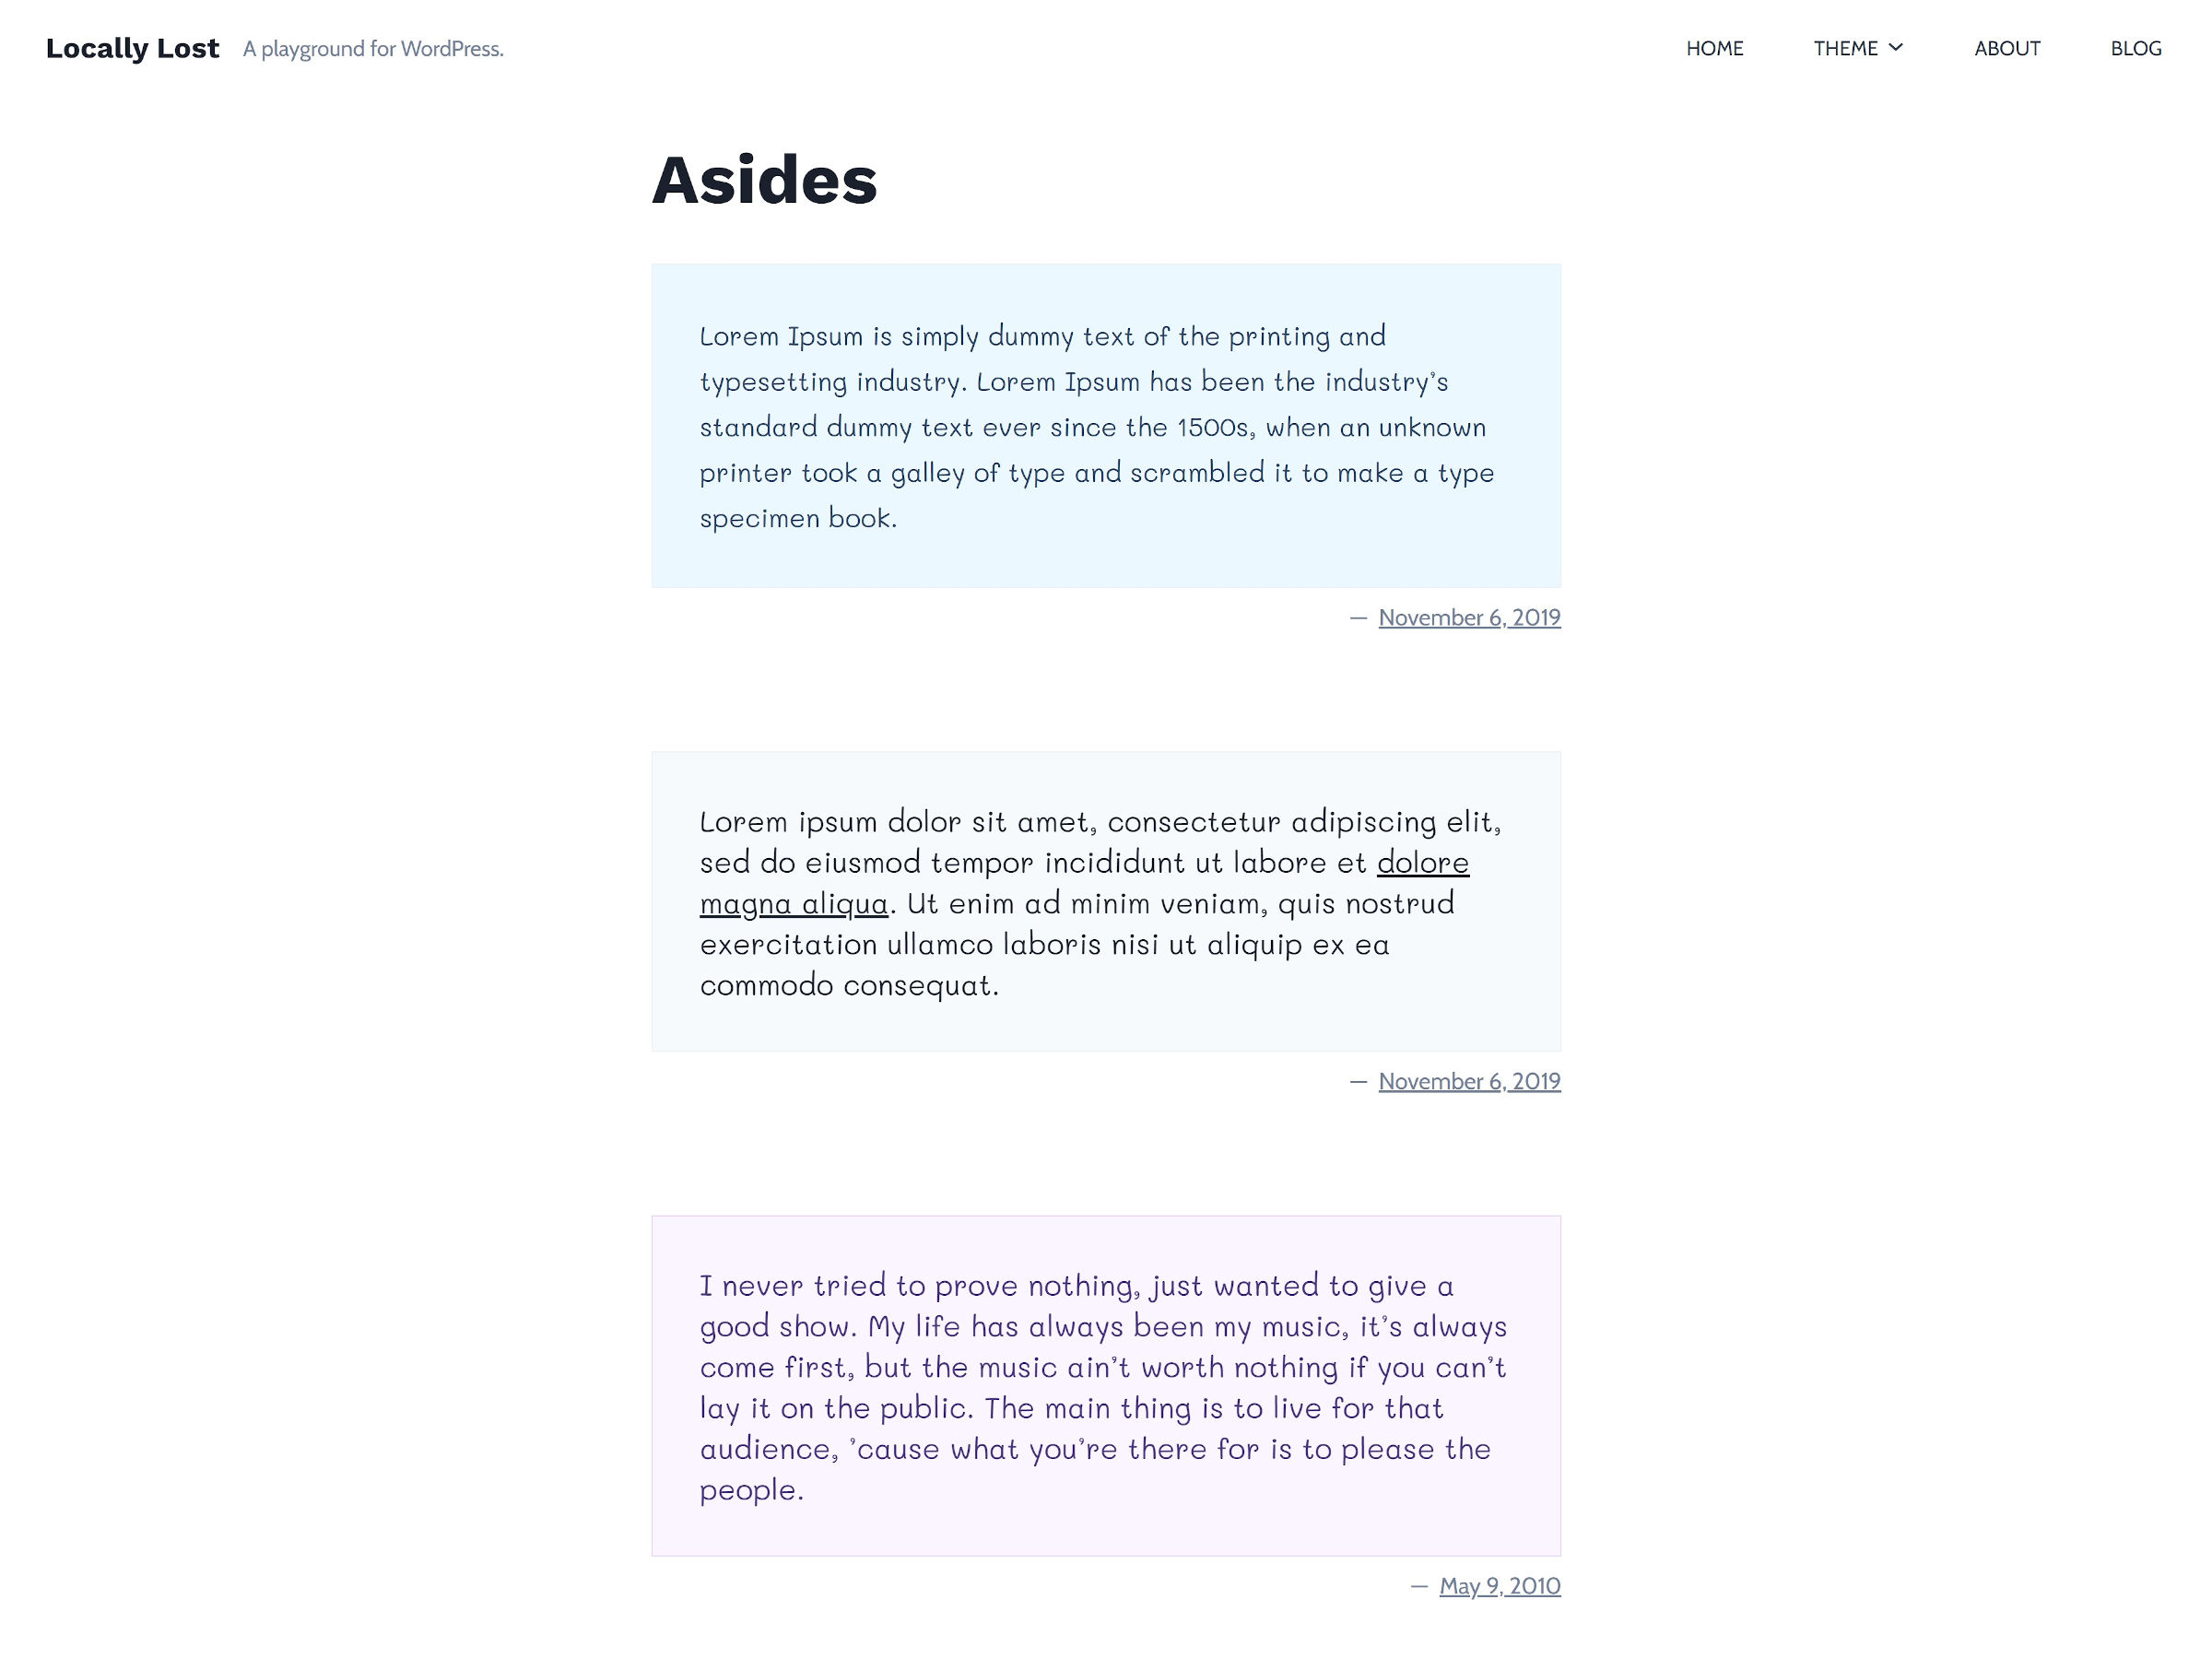 post-format-asides How Do Post Formats Fit Into a Block Theme World? design tips